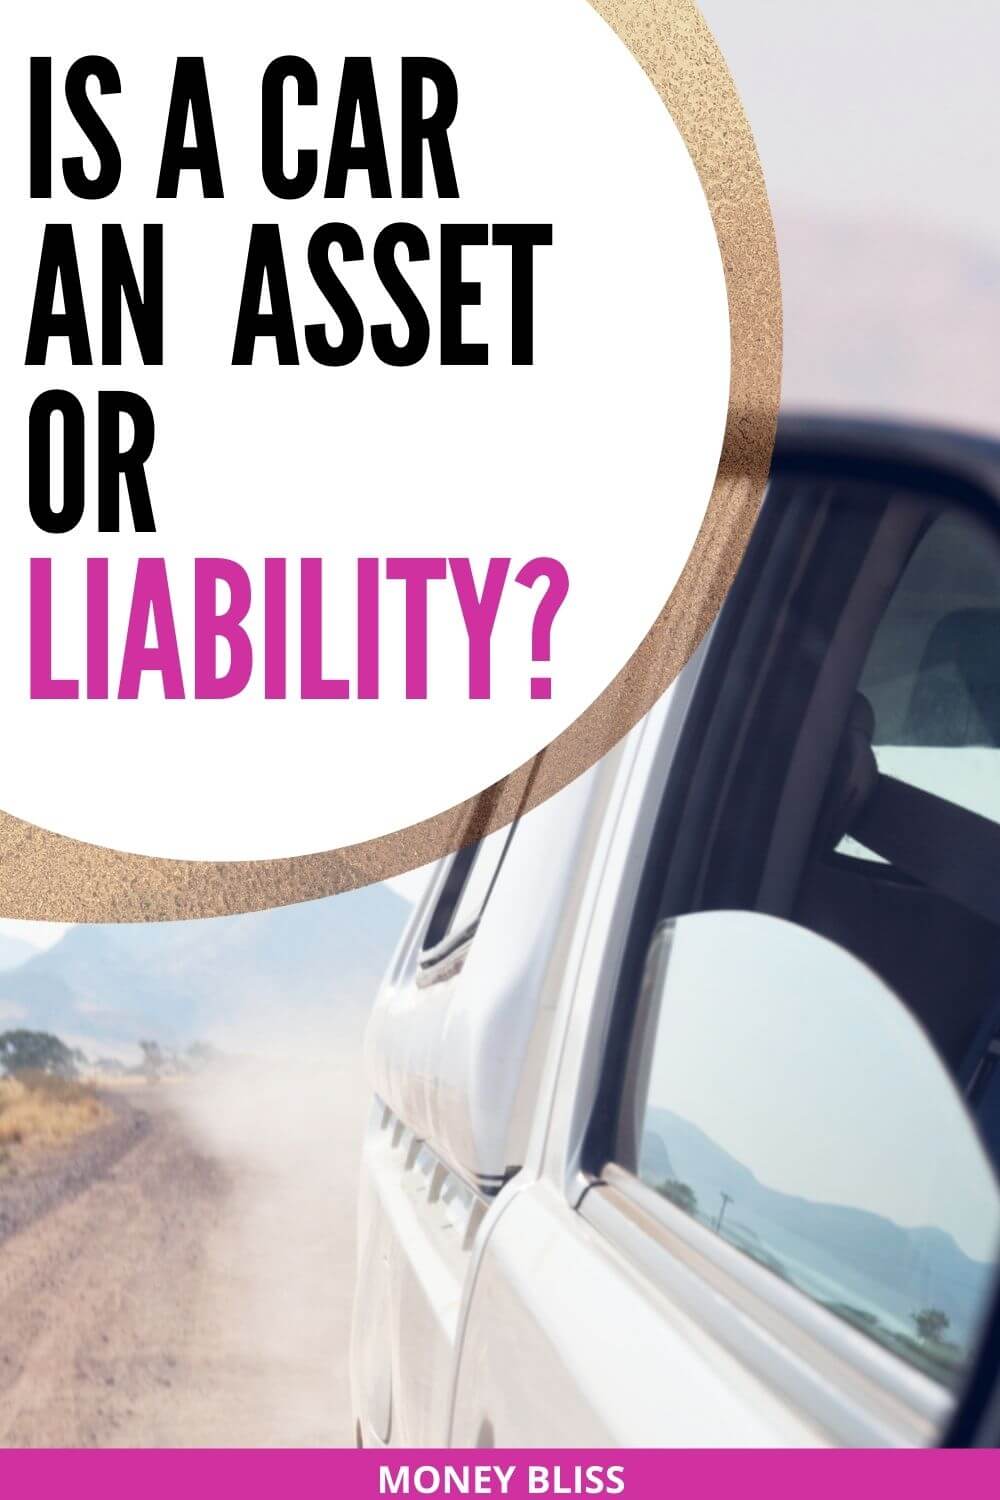 Is a car an asset or liability? Answer this question by looking at the purpose of the vehicle, its value and how much it will cost to repair if damaged.